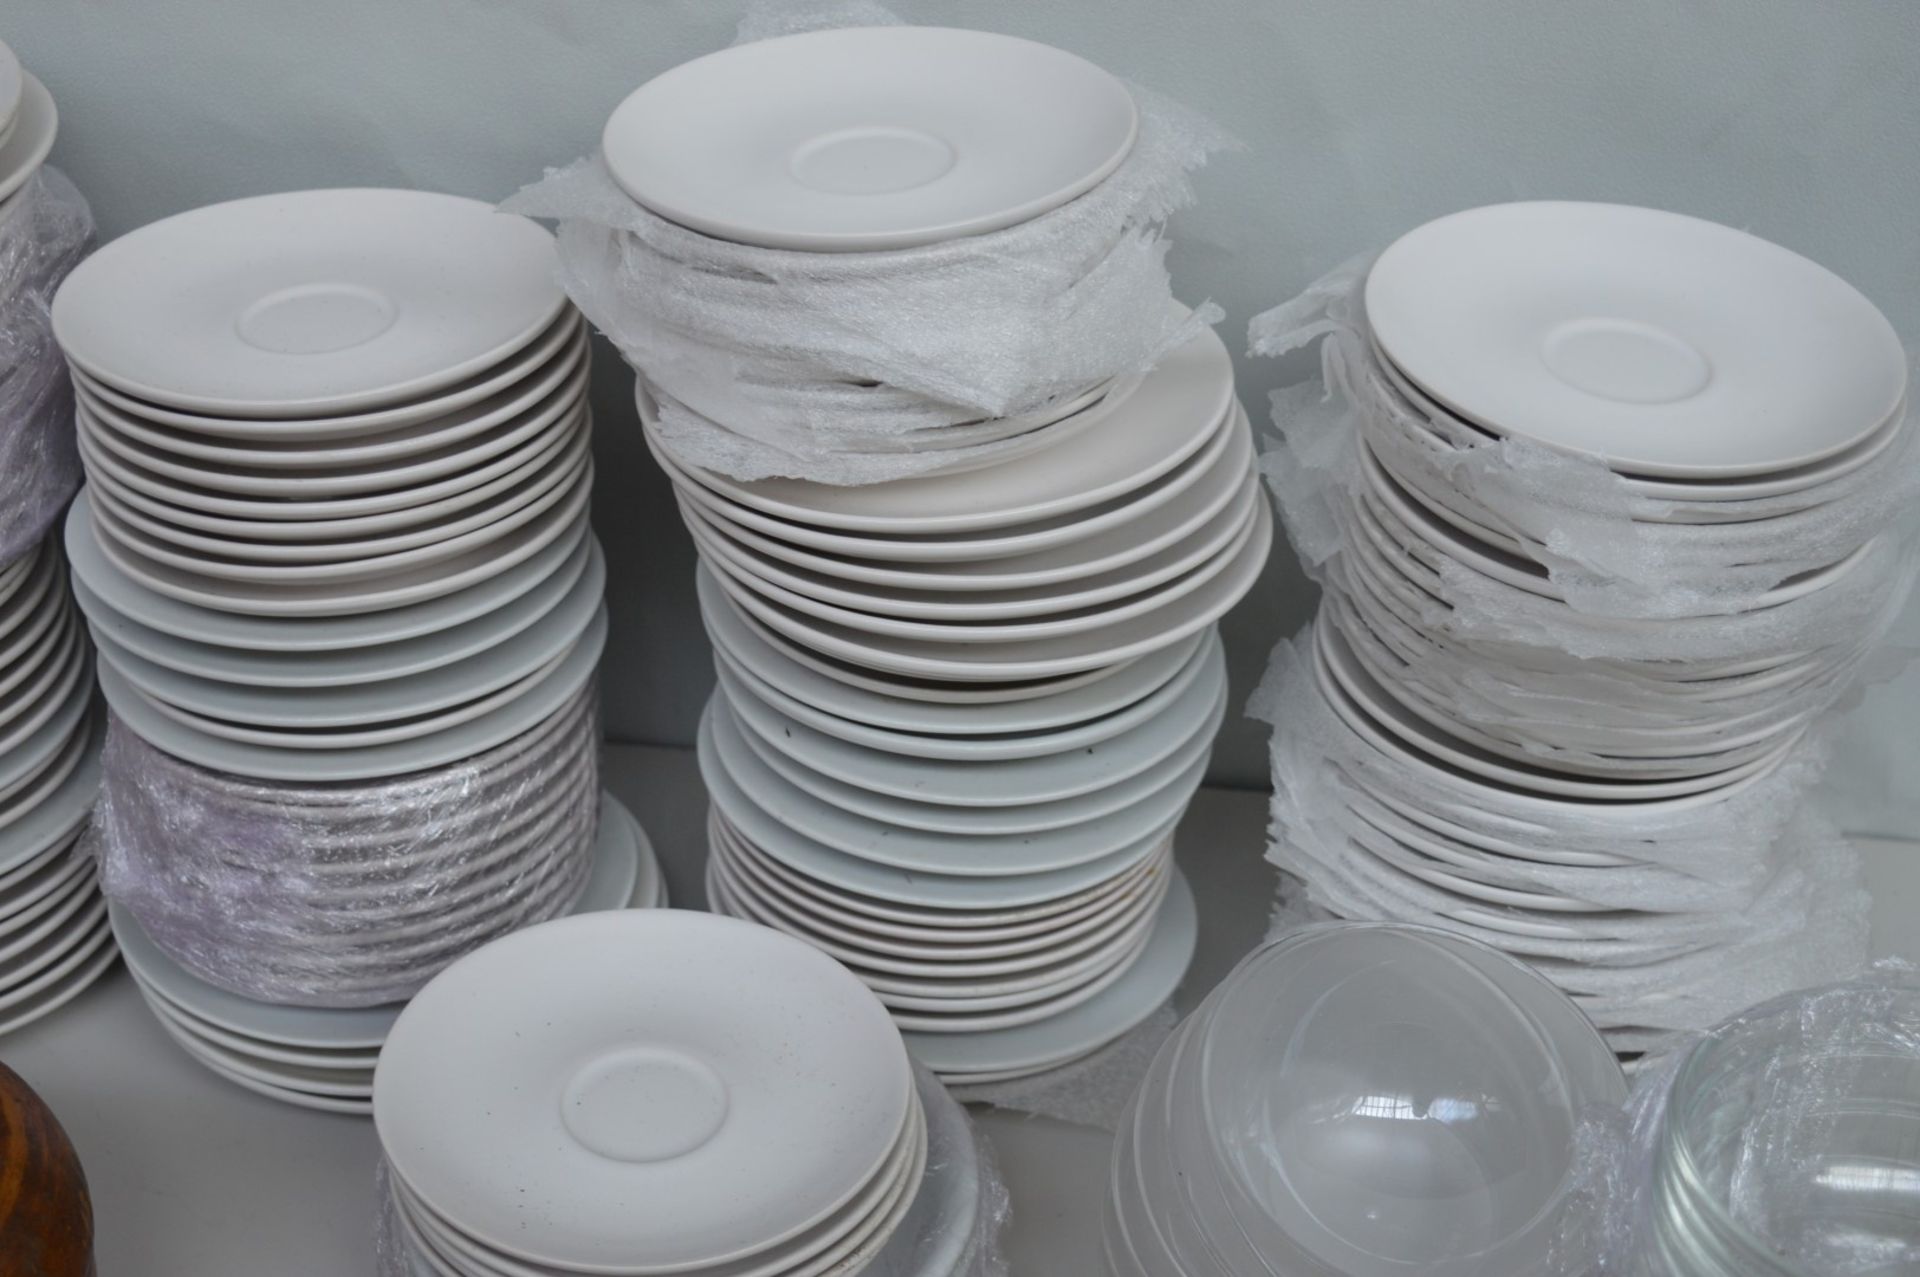 1 x Large Pallet of Various Catering / Pub Equipment - Includes Over 400 Plates, Bowels and Saucers, - Image 11 of 31